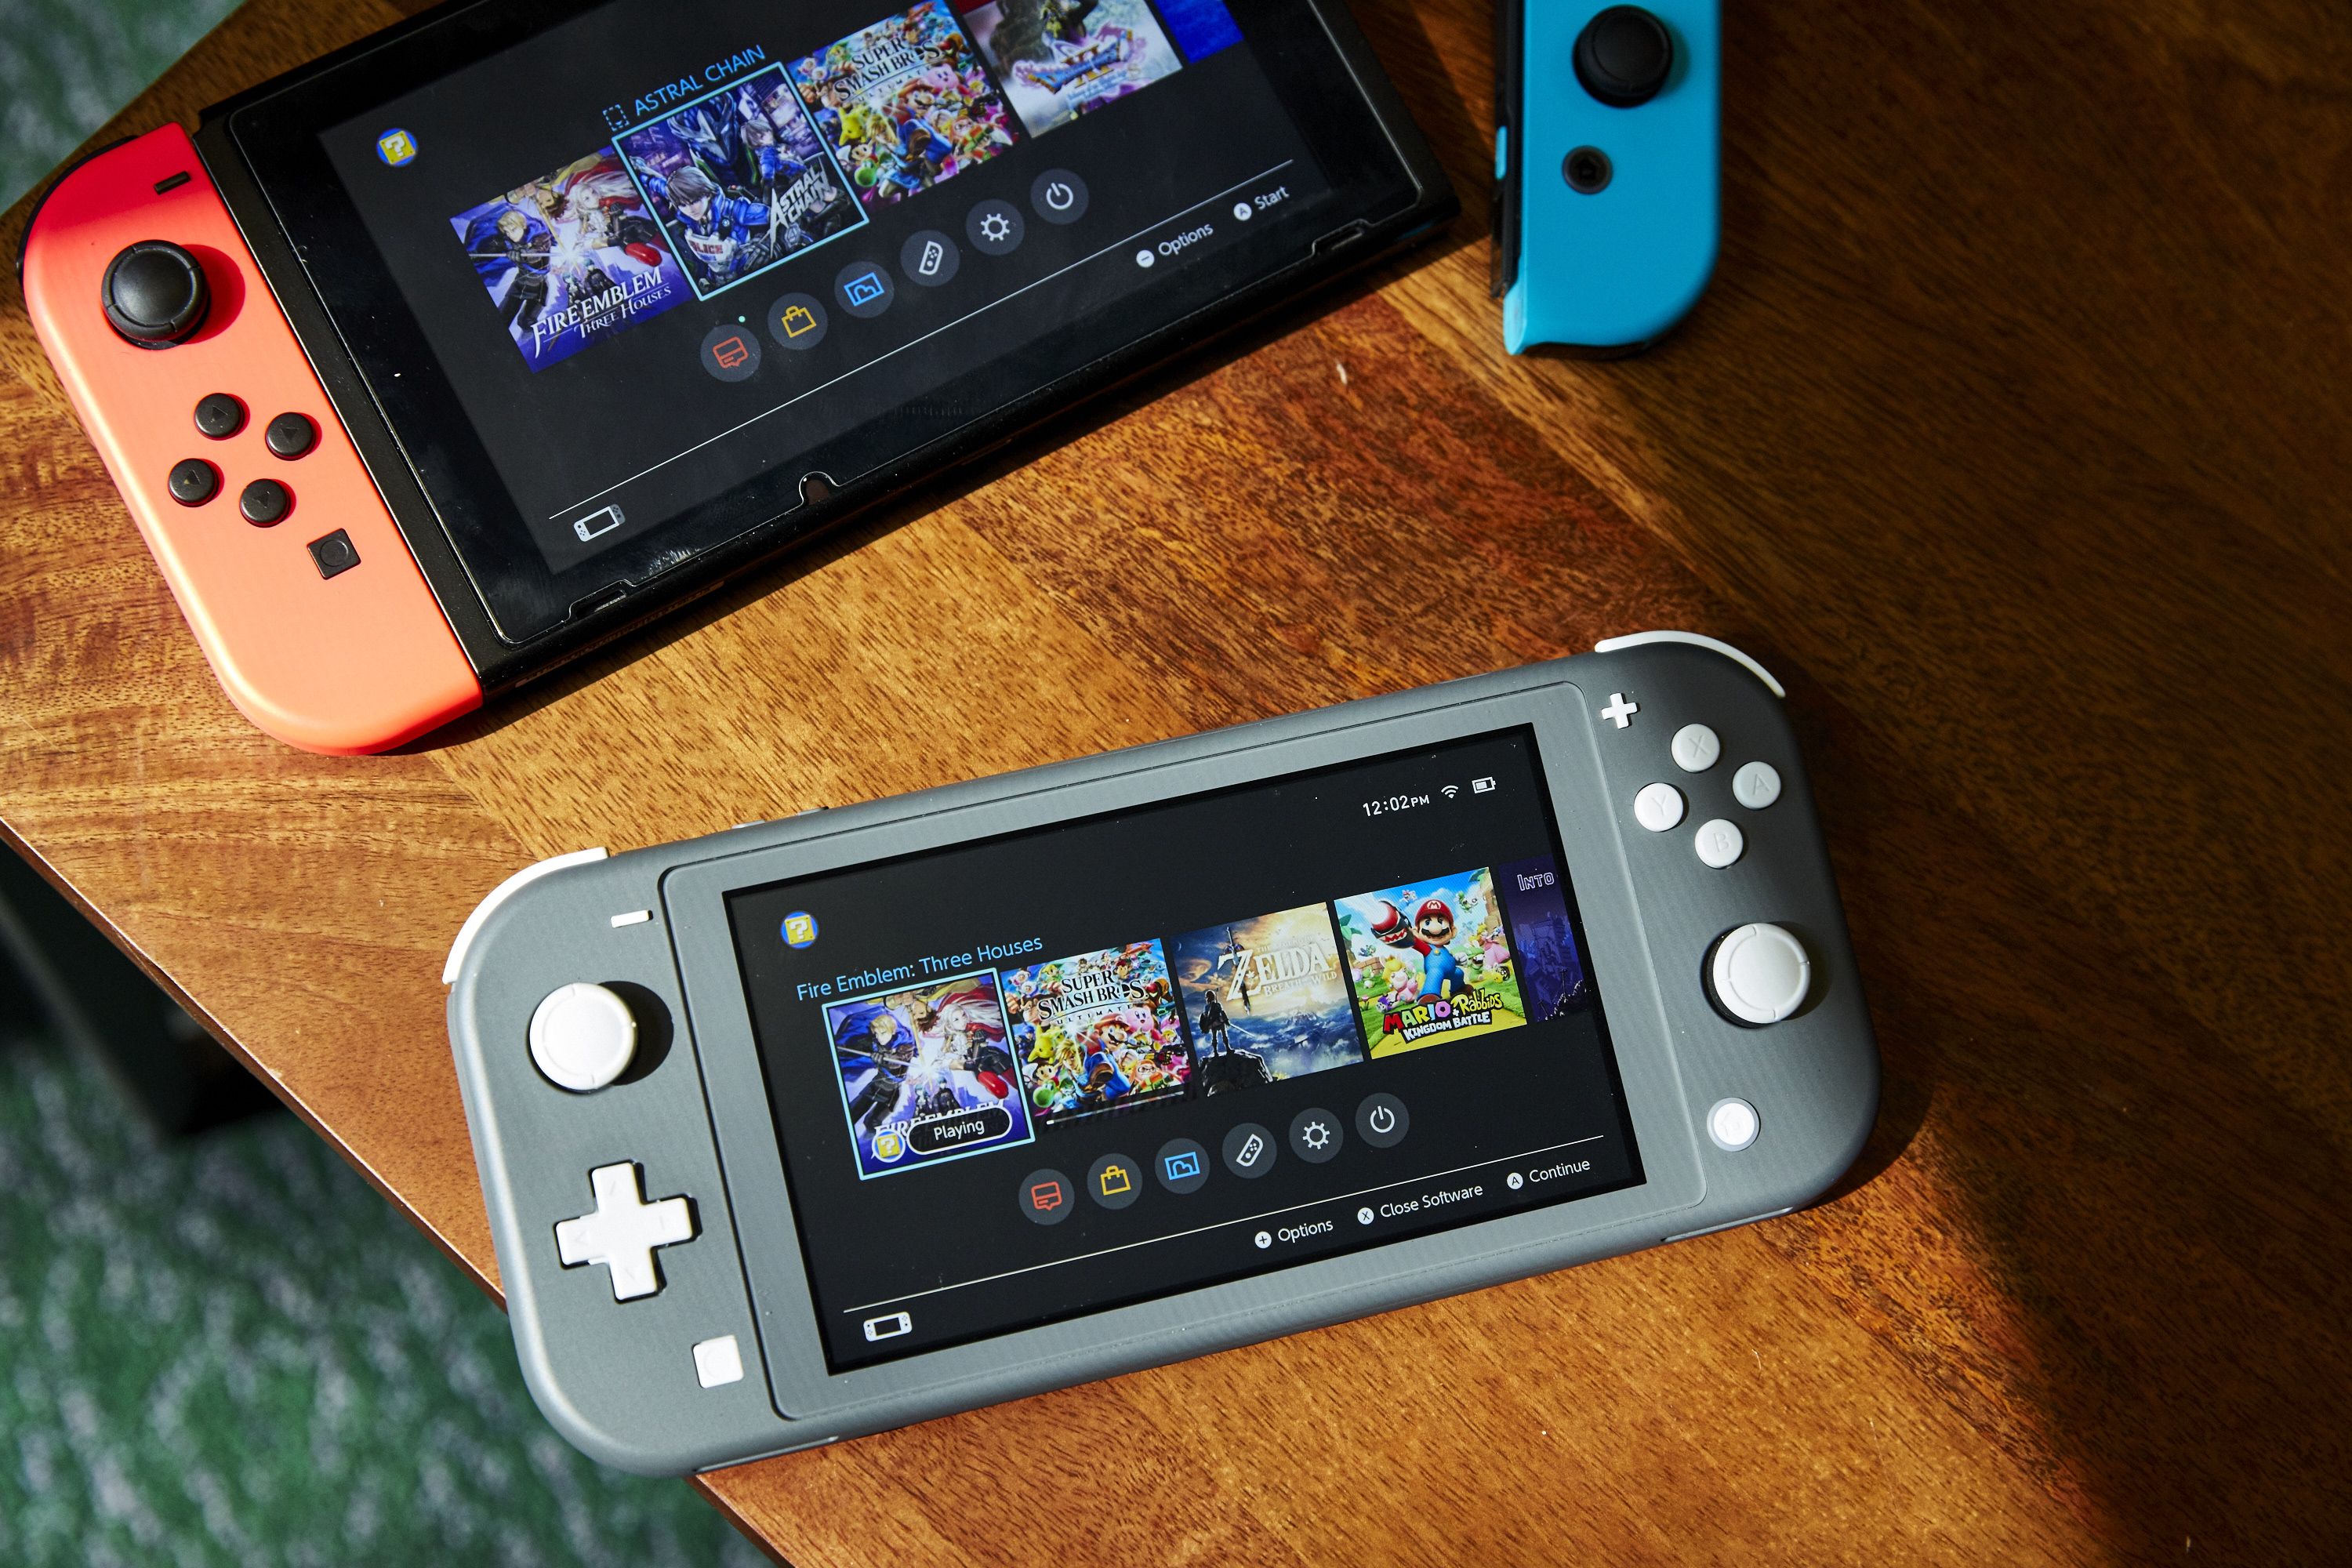 Nintendo Switch Pro: News, Rumors, And Expected Price, Release Date, And Specs